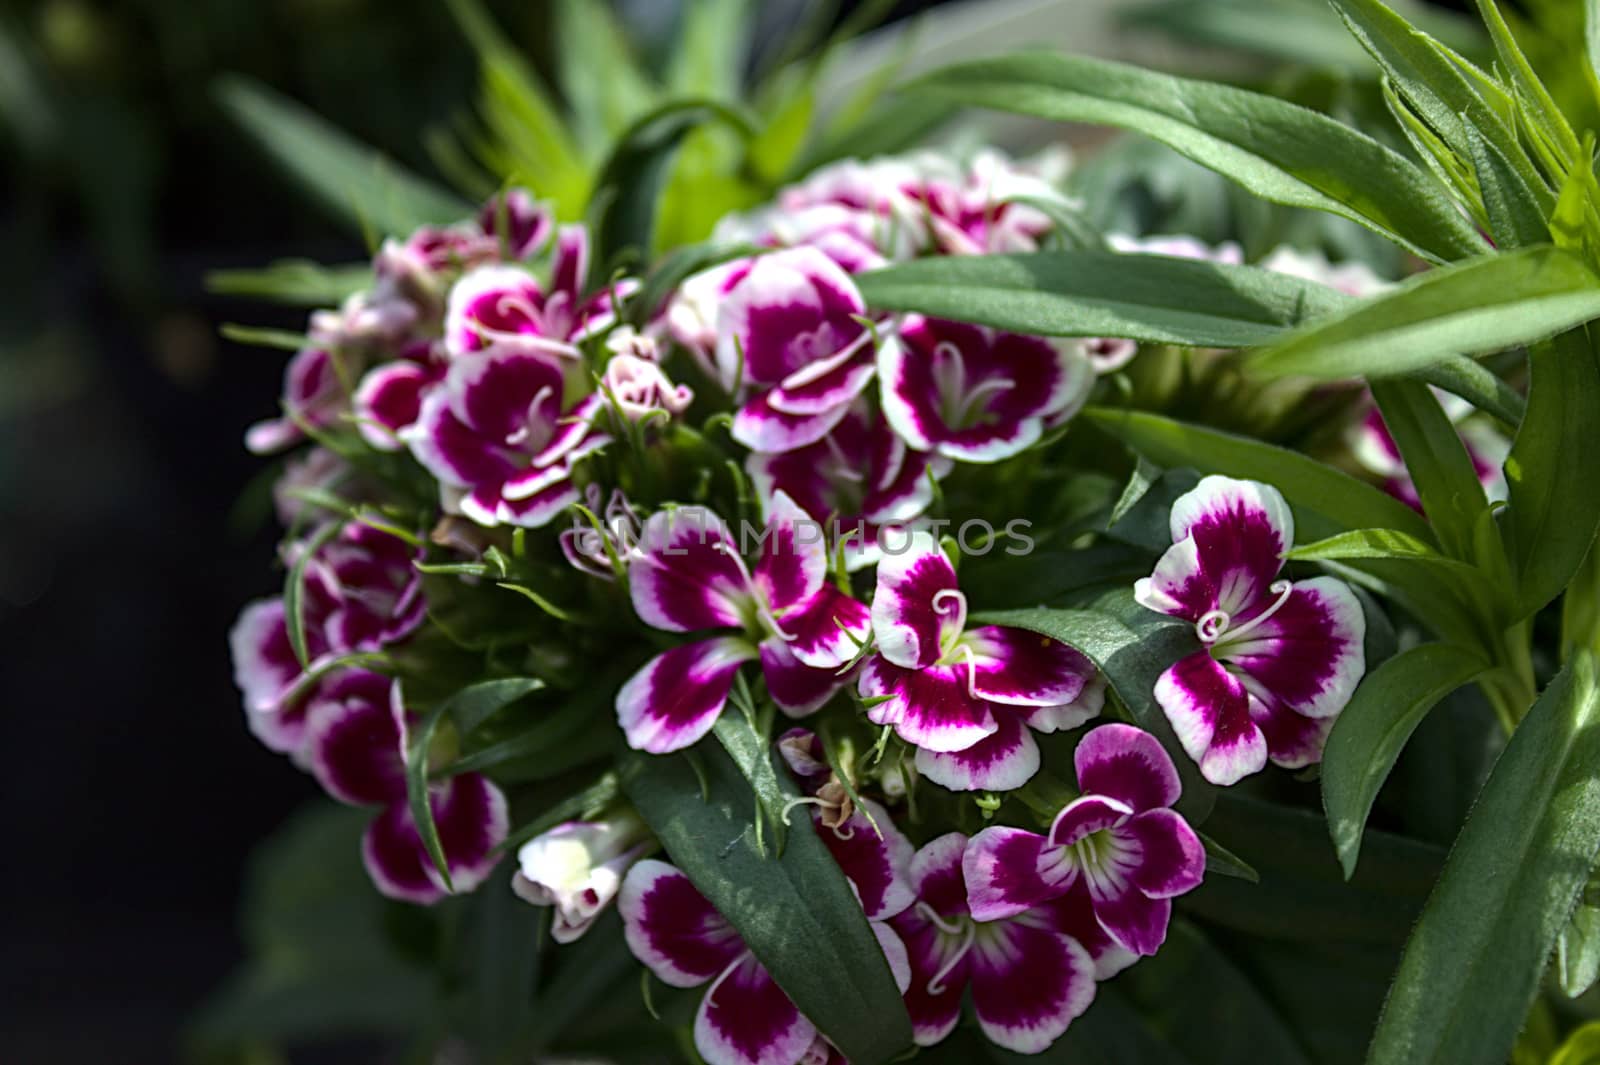 The picture shows sweet william in the garden